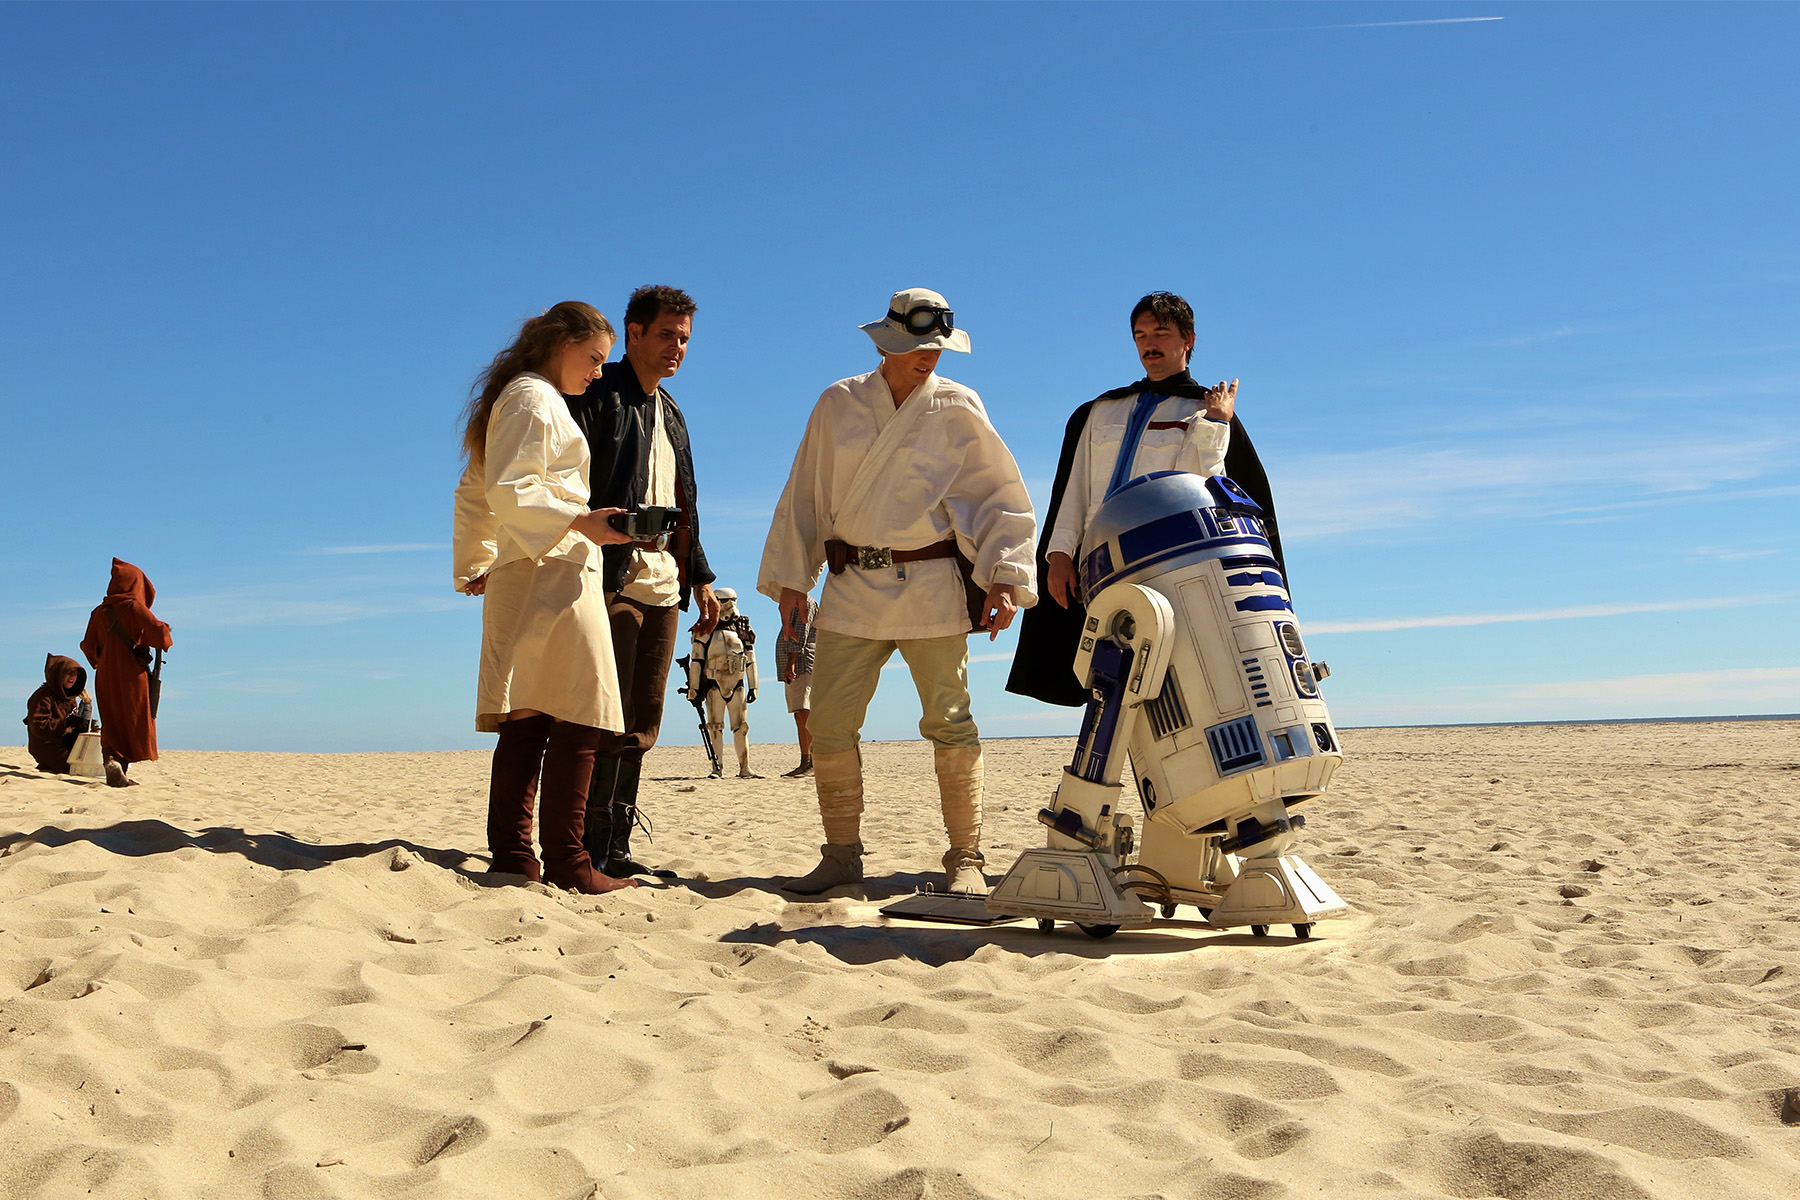 Star Wars fans recreate a search scene from the movie franchise.